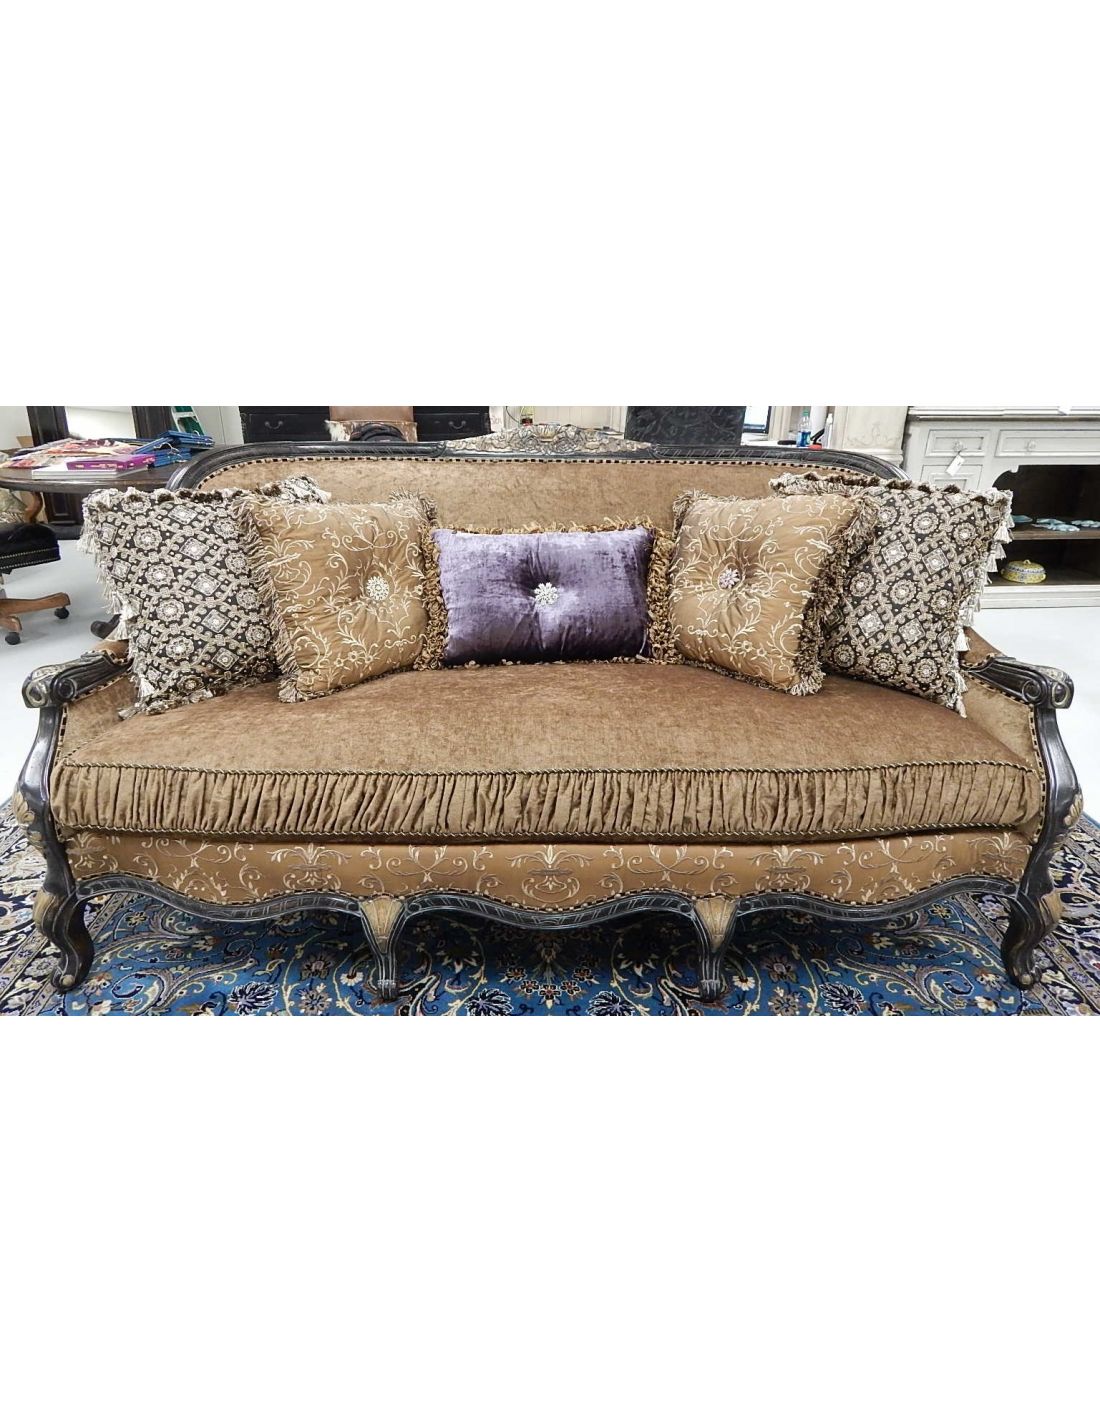 22 Victorian Style Sofa With A Black